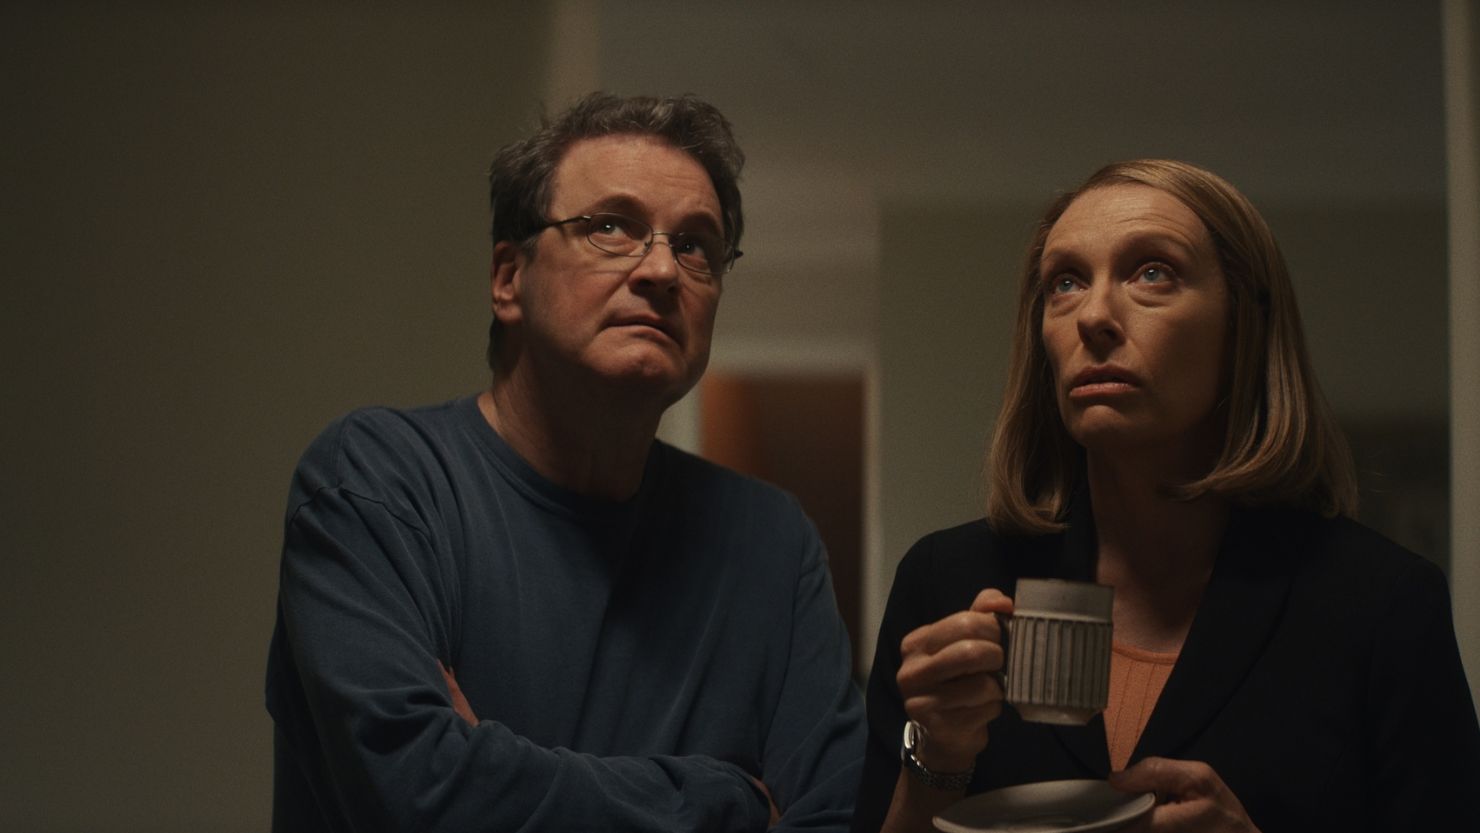 (From left) Colin Firth and Toni Collette are shown in a scene from "The Staircase" on HBO Max. 